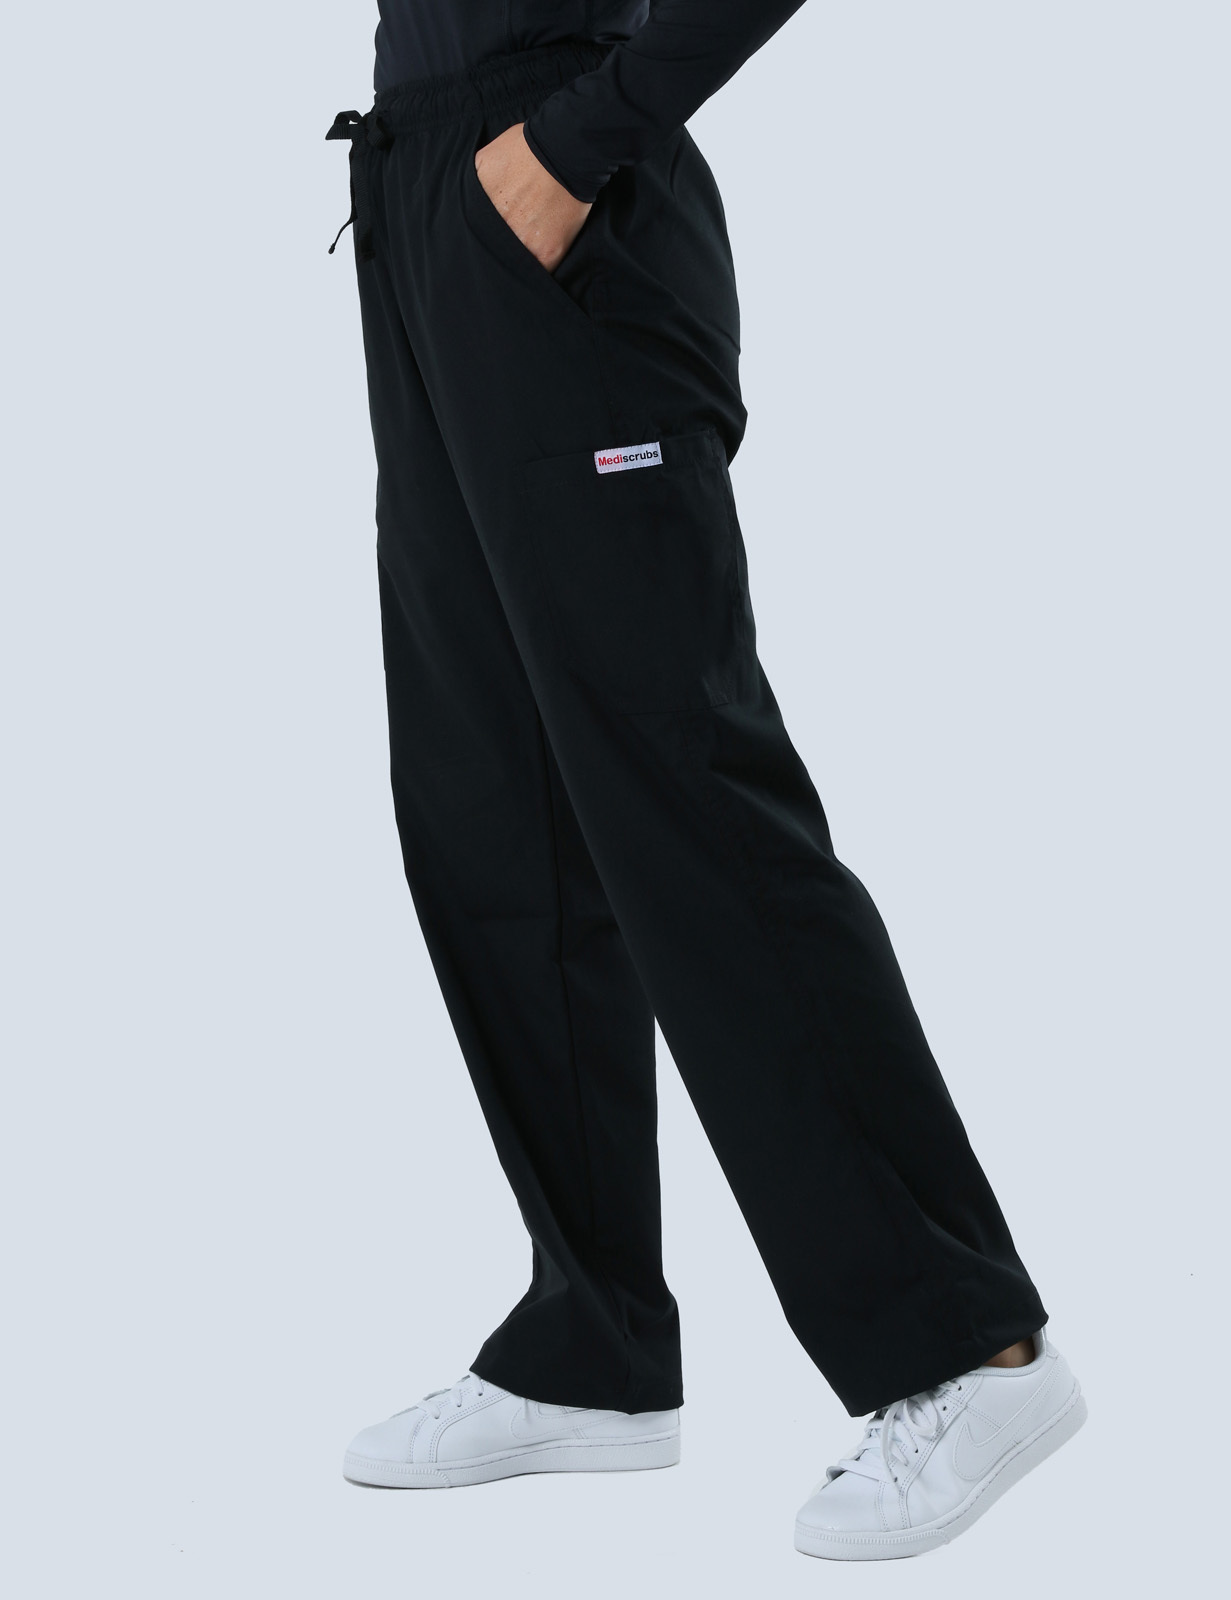 Logan Hospital - Medical Imaging Assistant (Women's Fit Spandex Scrub Top and Cargo Pants in Black incl Logos)